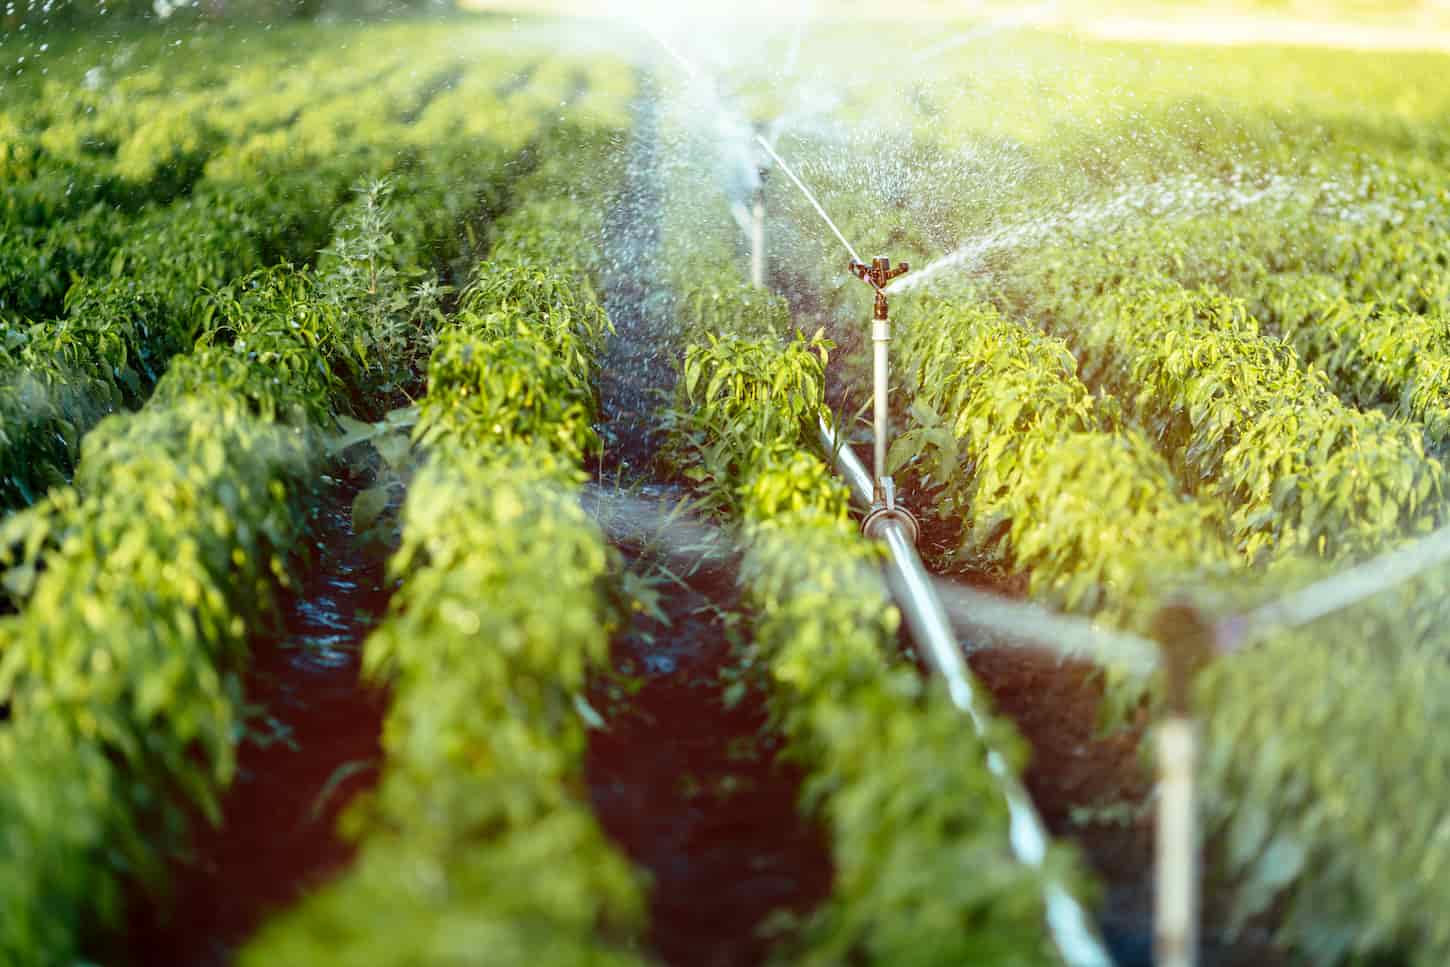 An image of an irrigation system in the vegetable field on a sunny summer day.